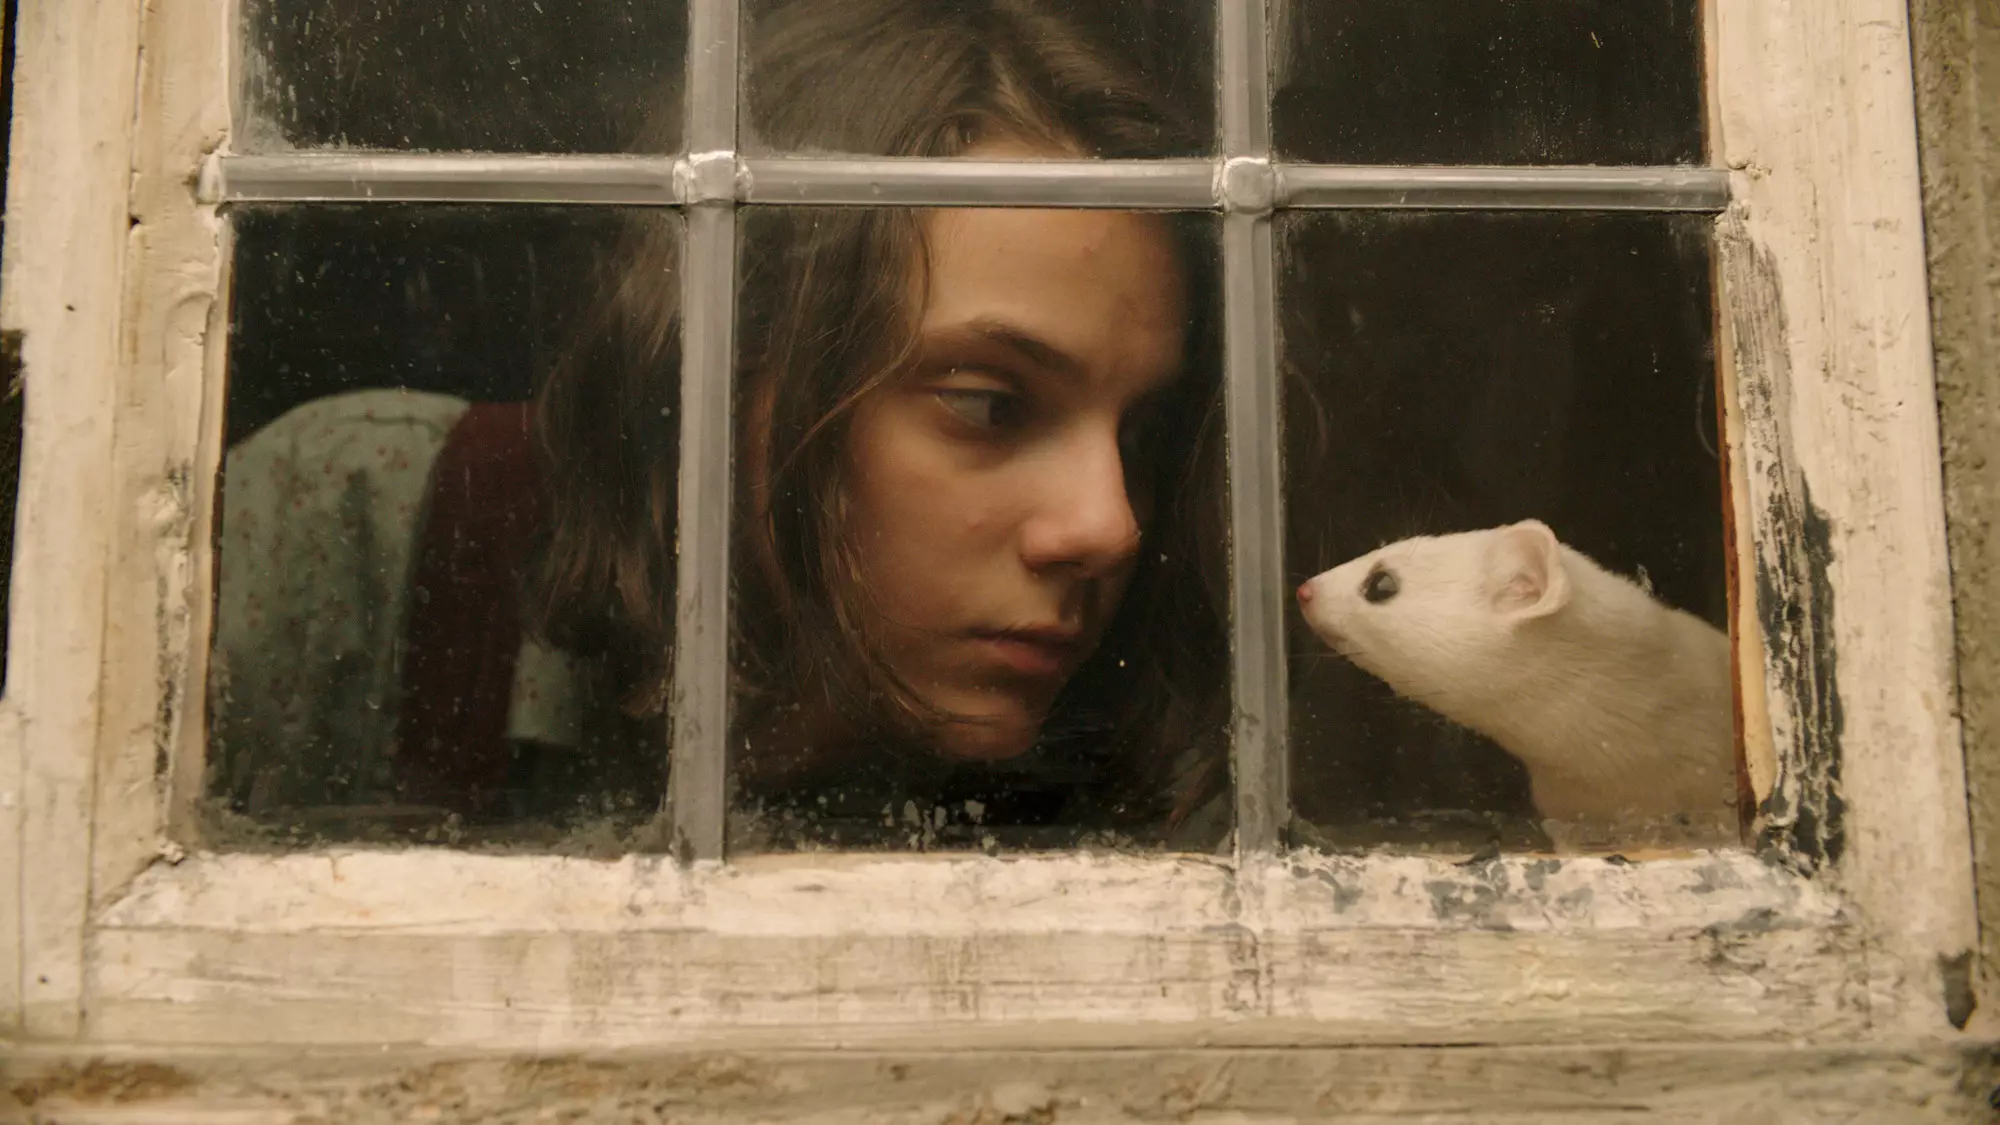 'His Dark Materials' follows the adventures of Lyra who wants to know why children her age are going missing (